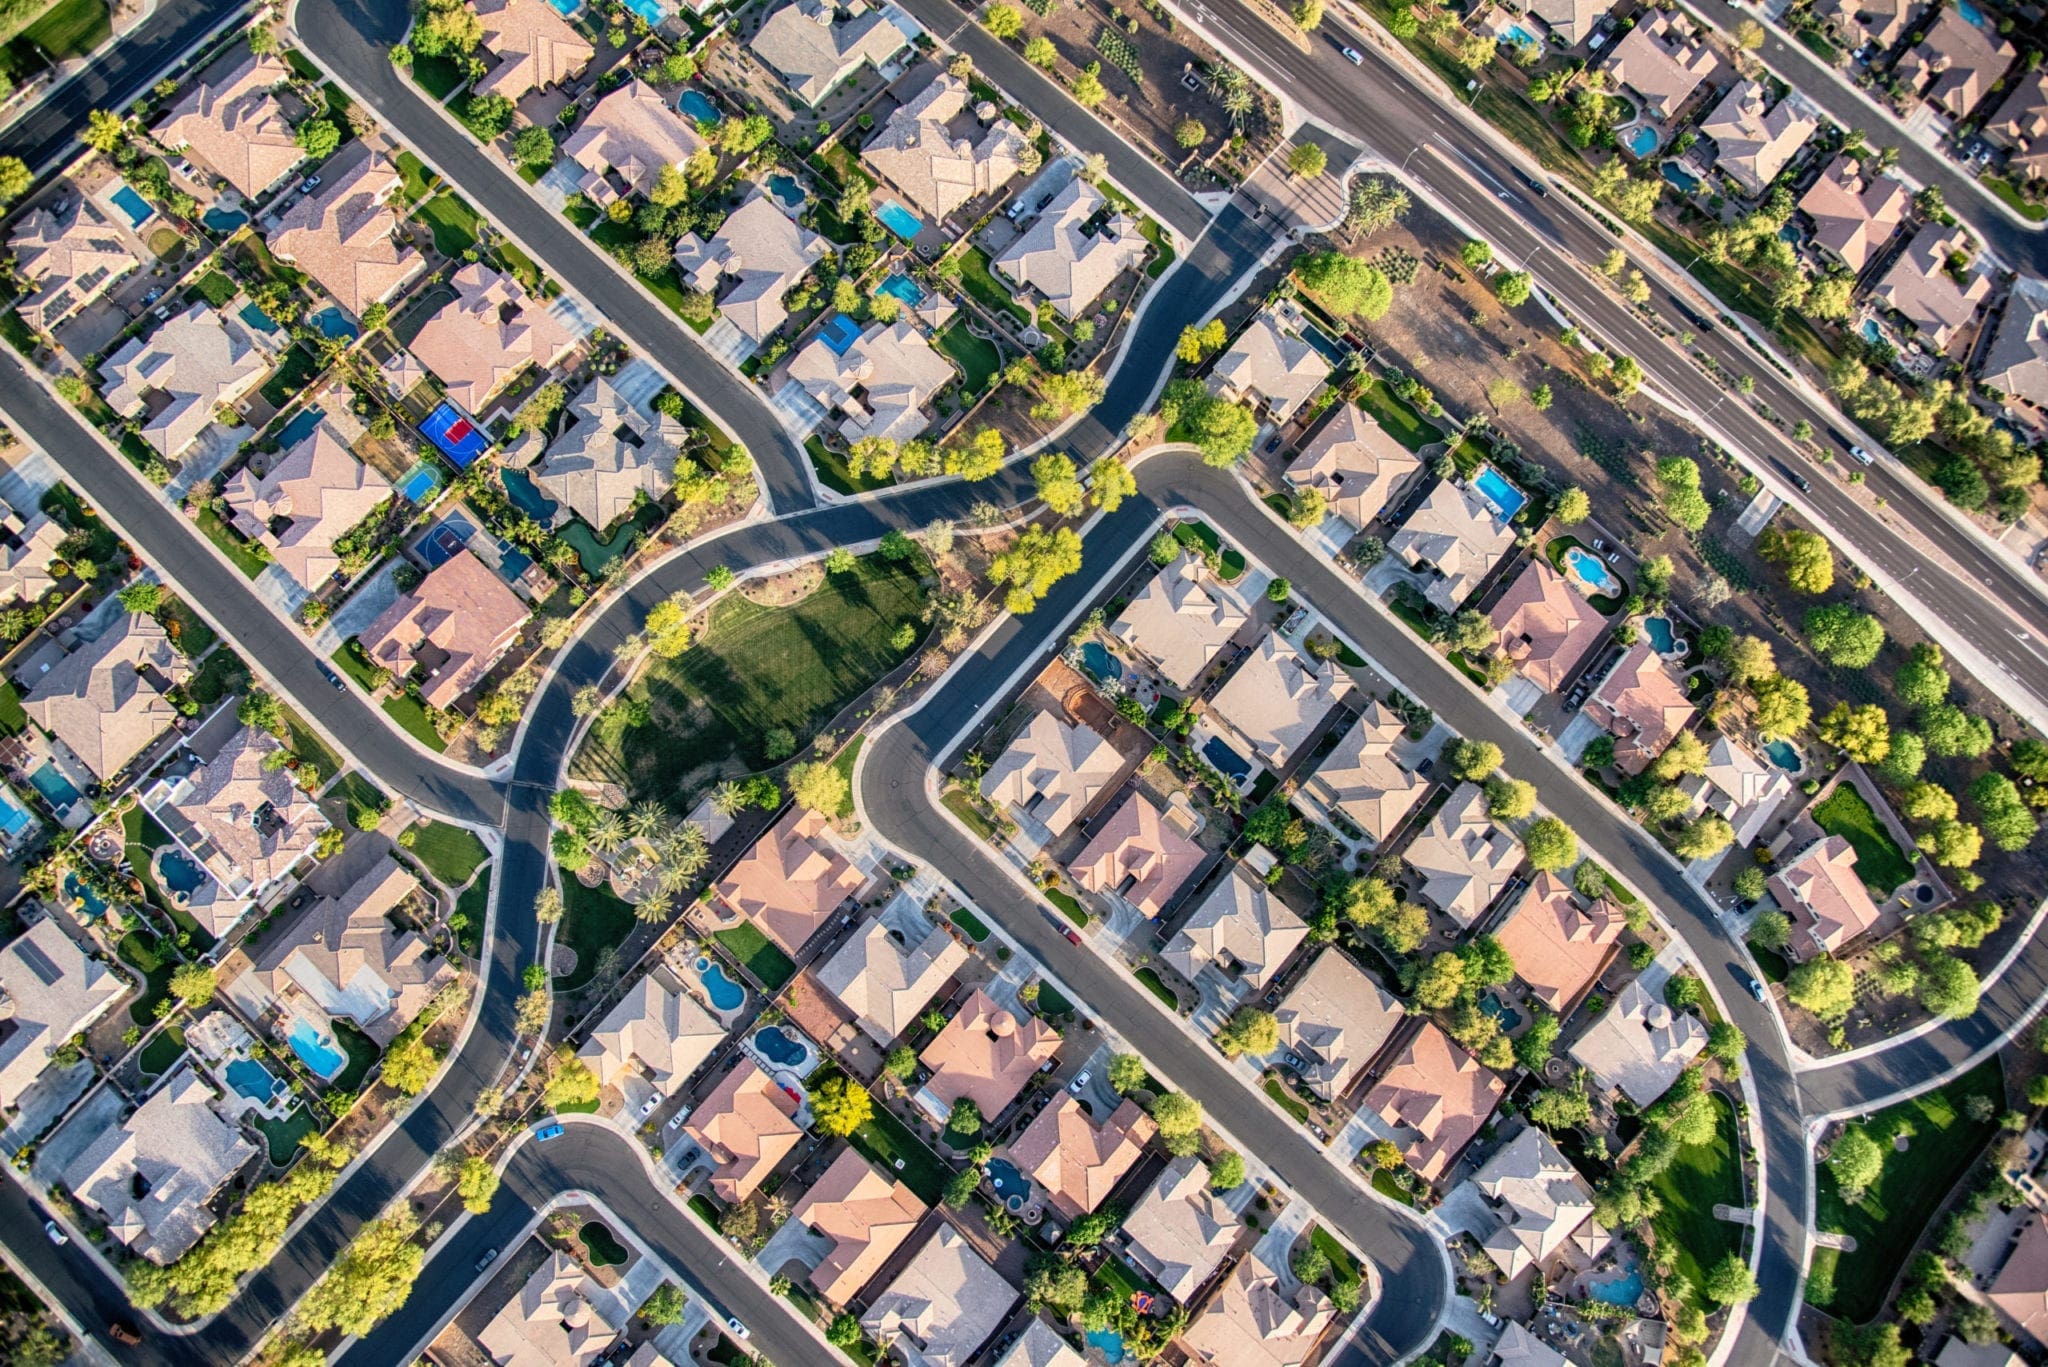 Aerial view looking directly down on homes in a planned exclusive residential community in the Scottsdale area of Arizona, used by AvidXchange for article about how paperless AP mitigates fraud risk for community association management companies.